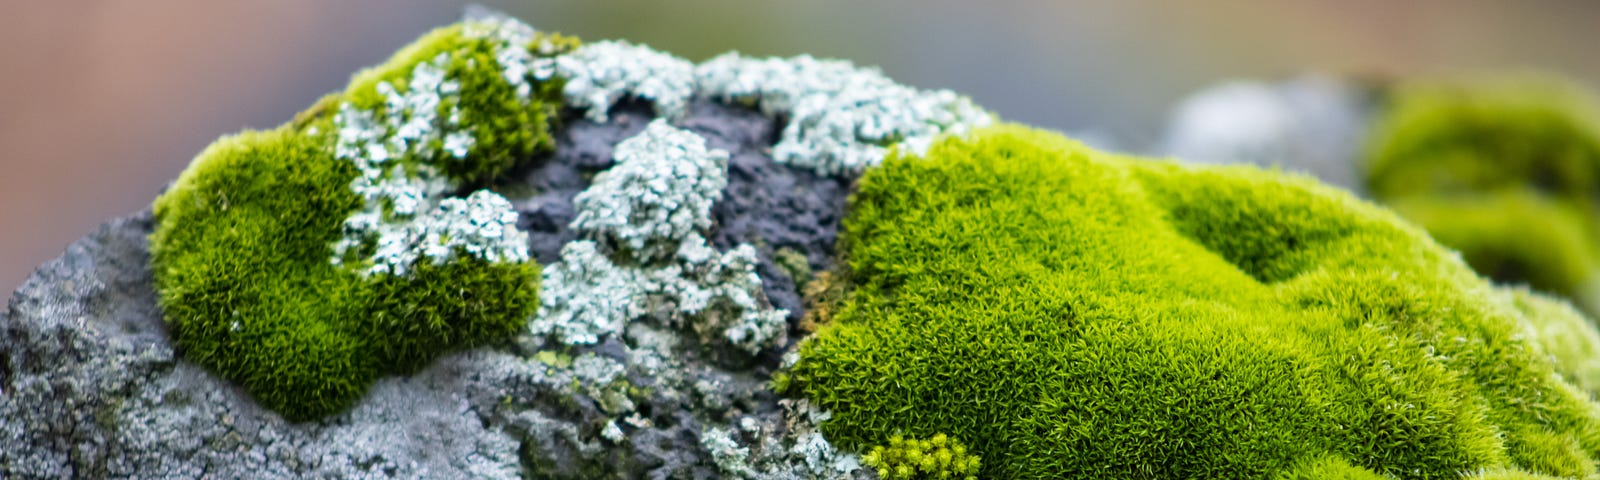 Moss on a rock with some lichen